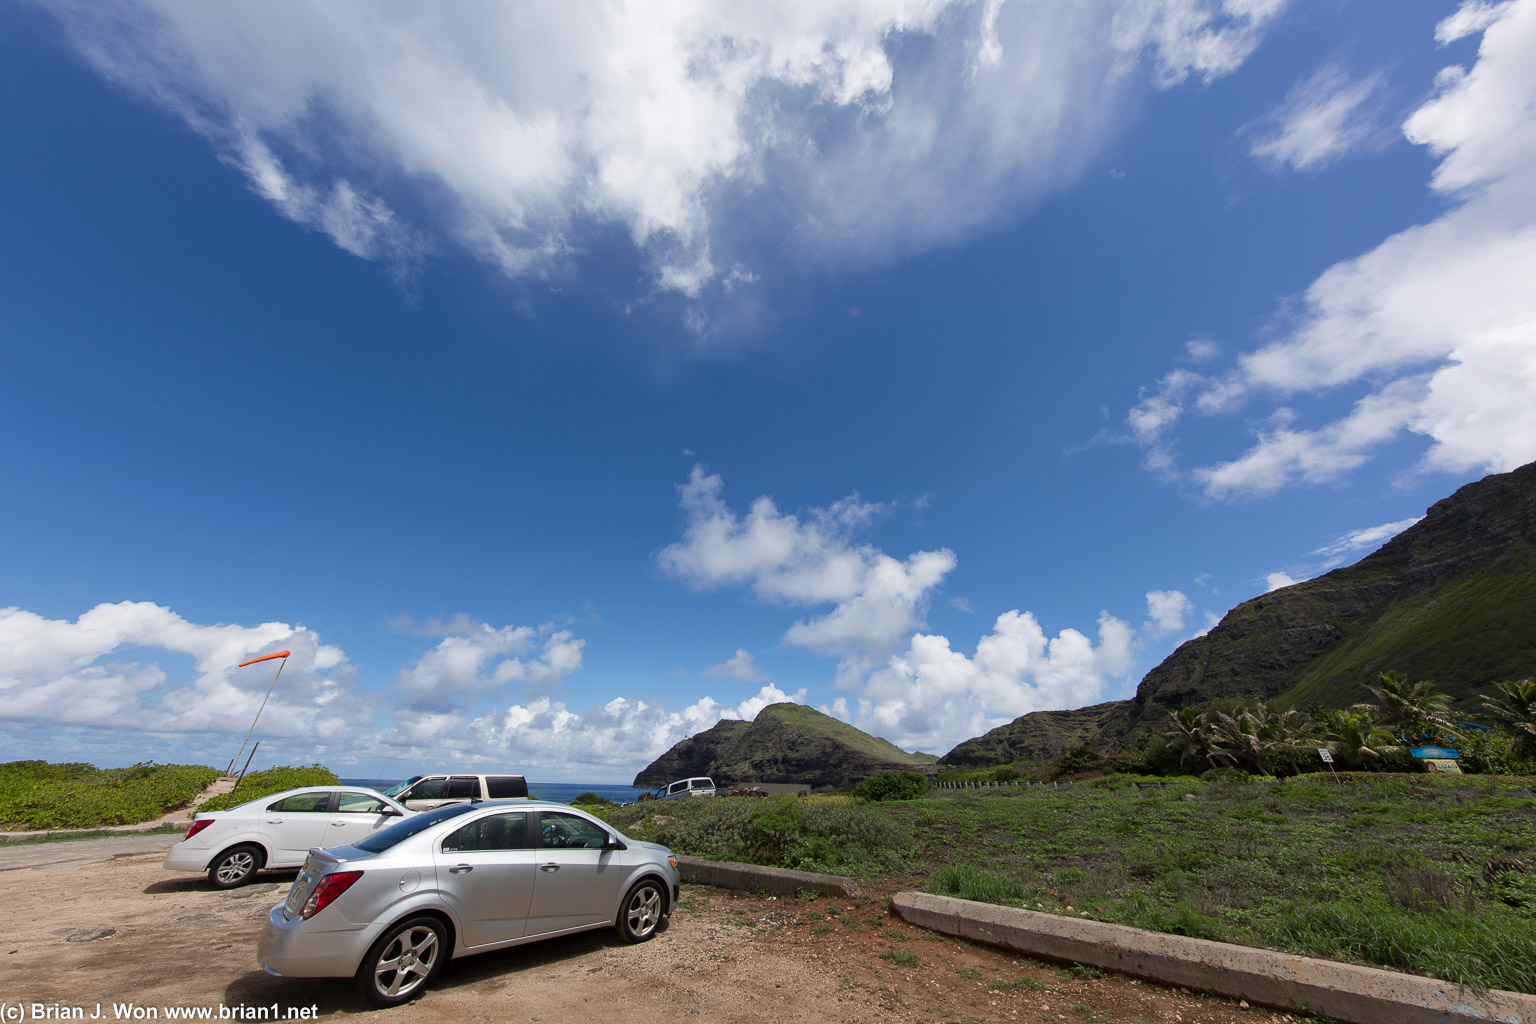 Makapu'u Point and a highly pimp Chevy Sonic rental car.